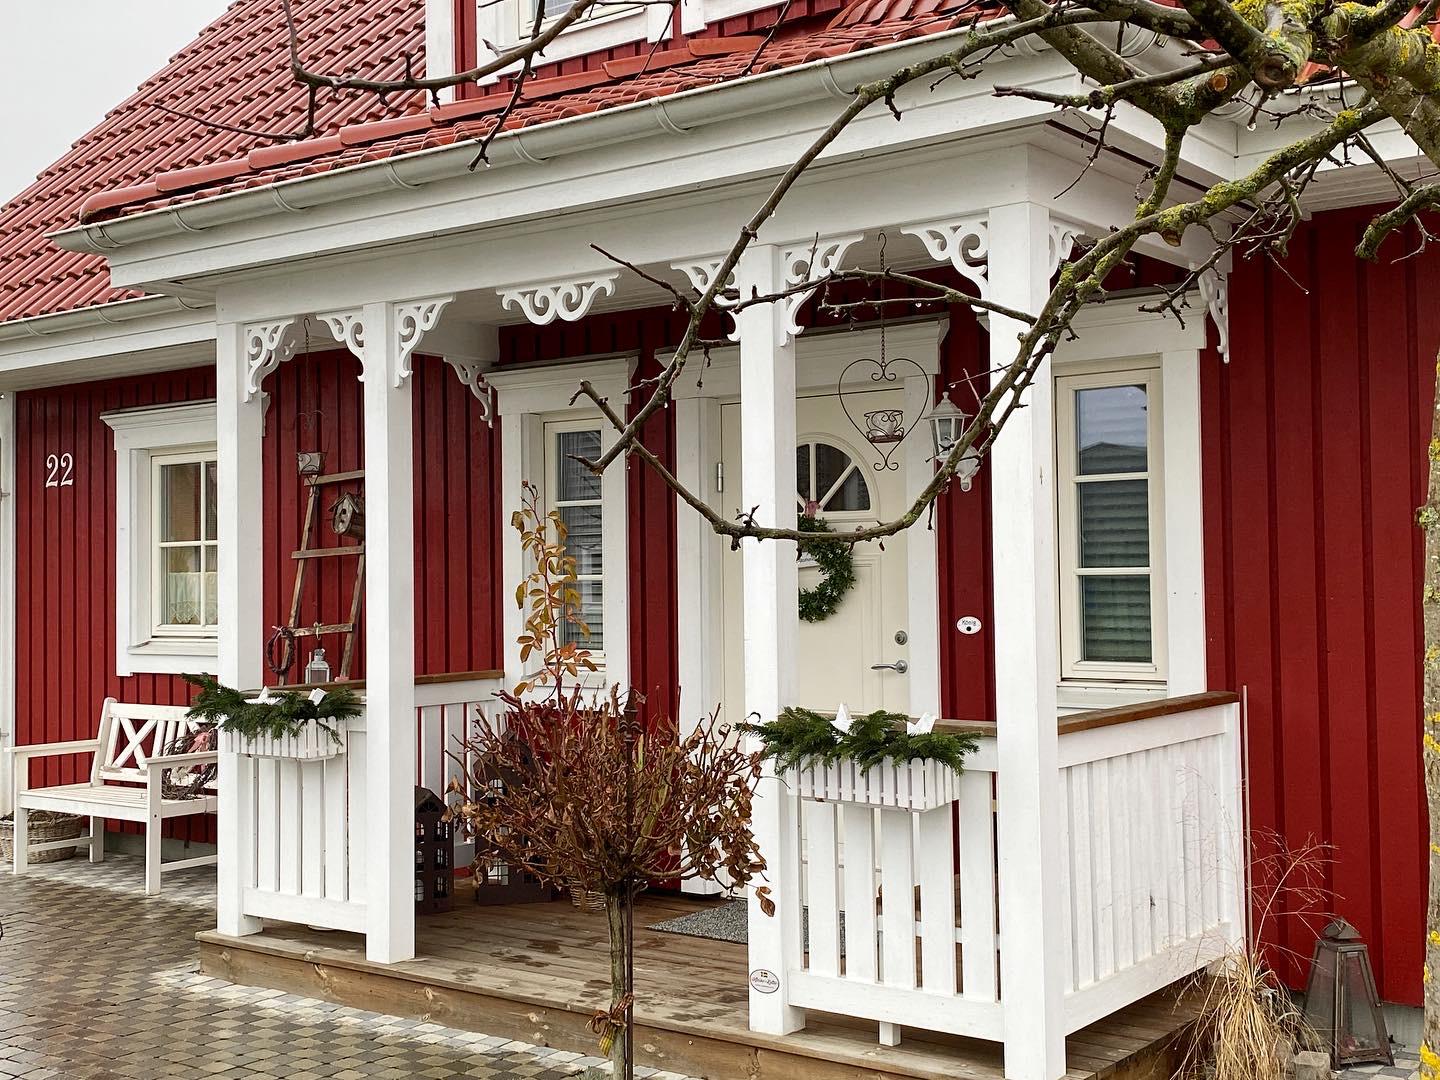 An old red Swedish house with a white entry porch and decorative wooden brackets for outdoor use. A porch inspired by the turn of the century and the 19th century - Gaveldekor.